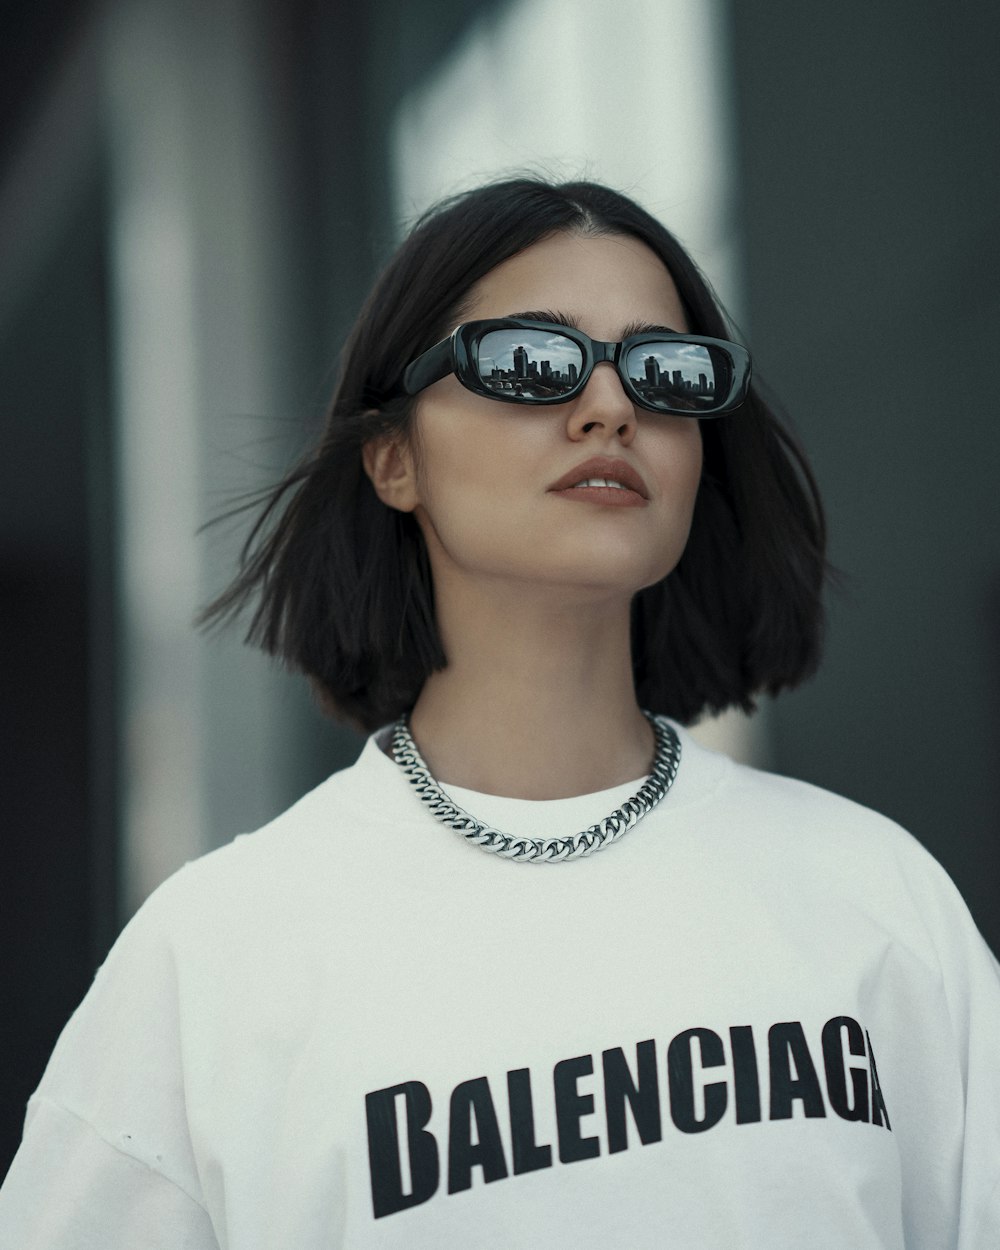 a woman wearing sunglasses and a t - shirt